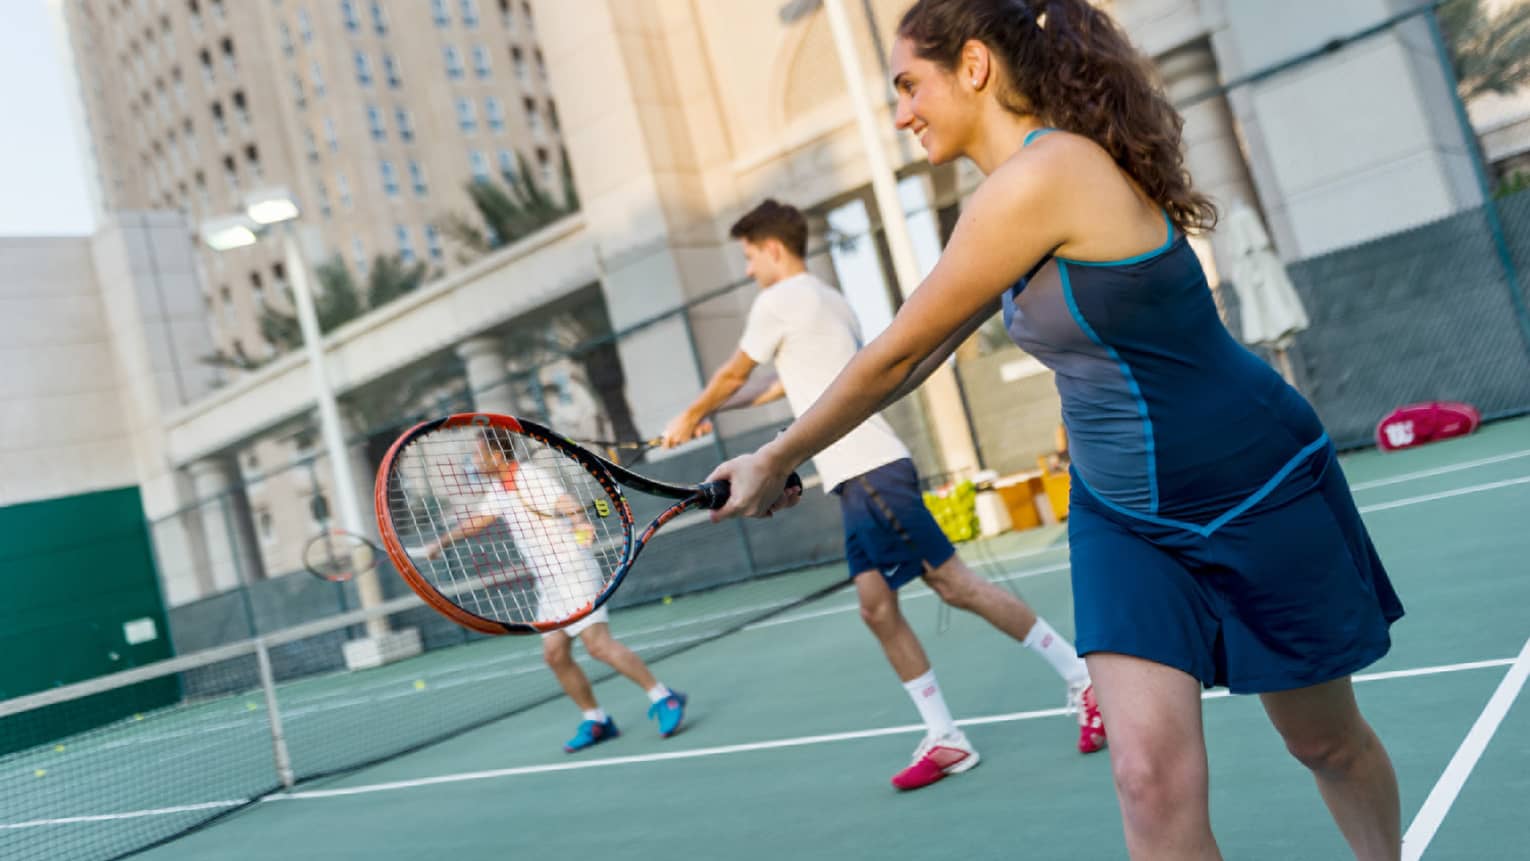 Woman in tennis outfit holds out racket, two people in background on court